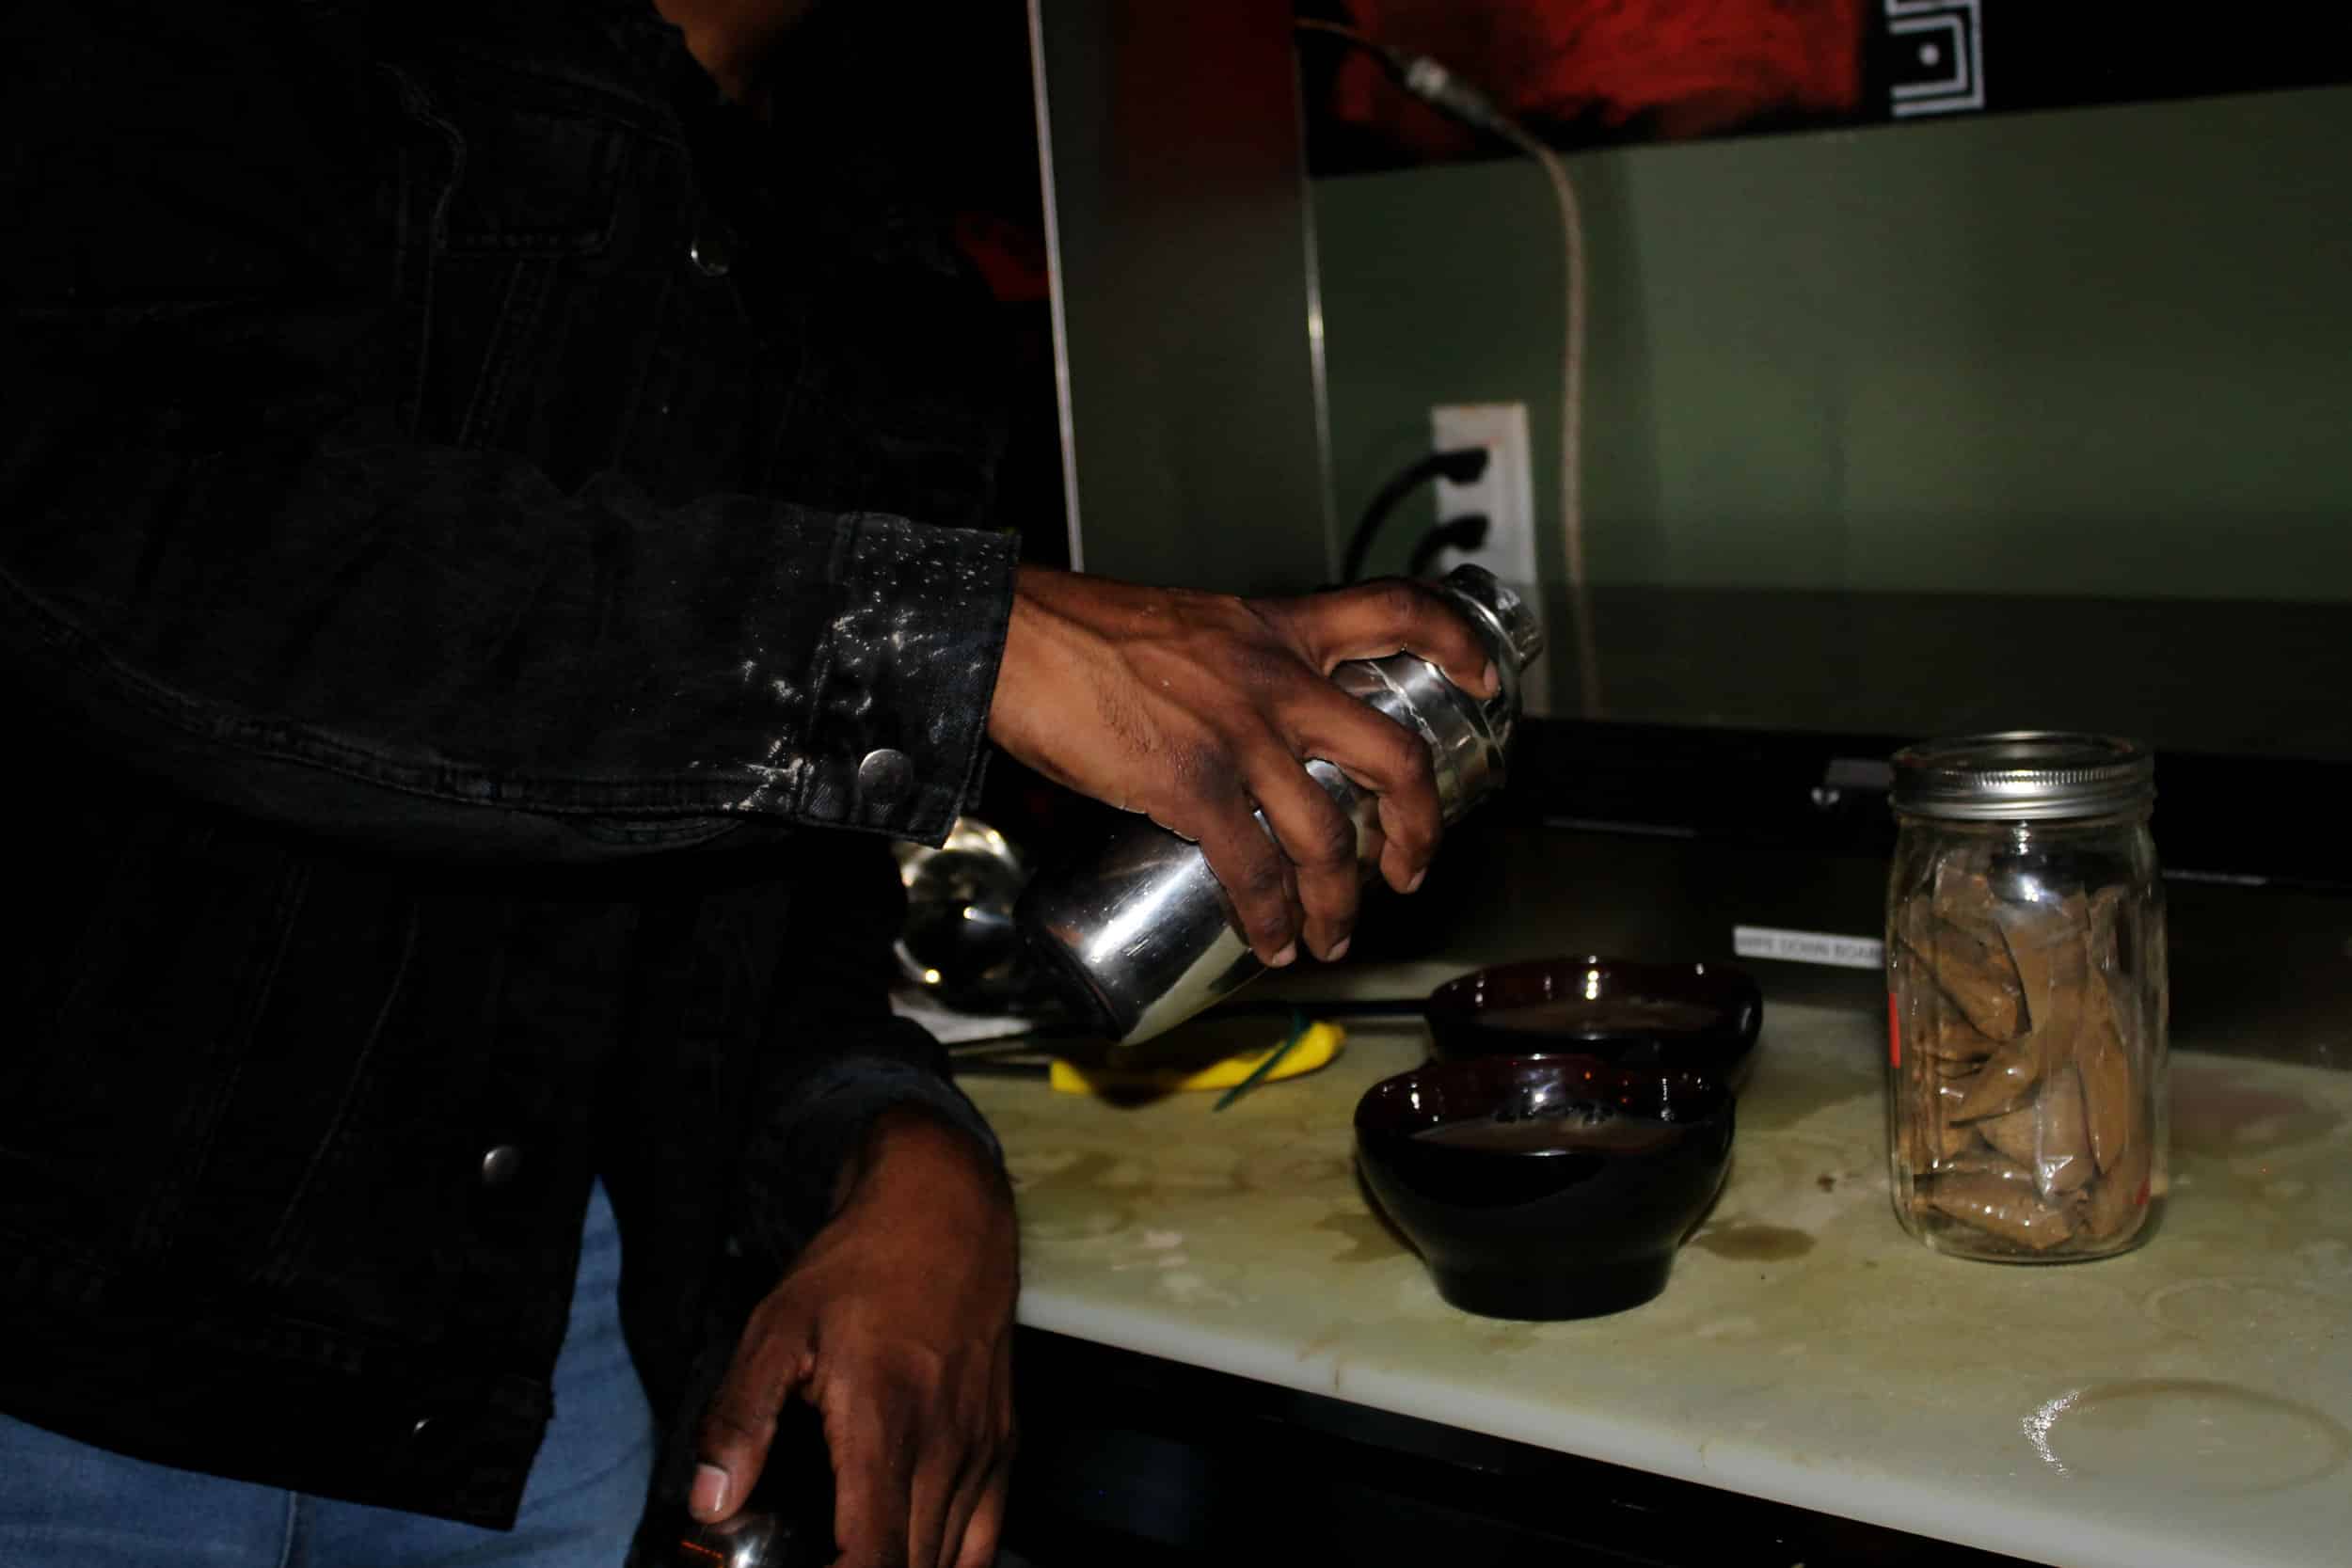 Marcus pouring a shell of traditional Kava, the main drink you can get at The Kava Konnection for only $5 during happy hour Tuesdays-Thursdays 5-7 p.m.